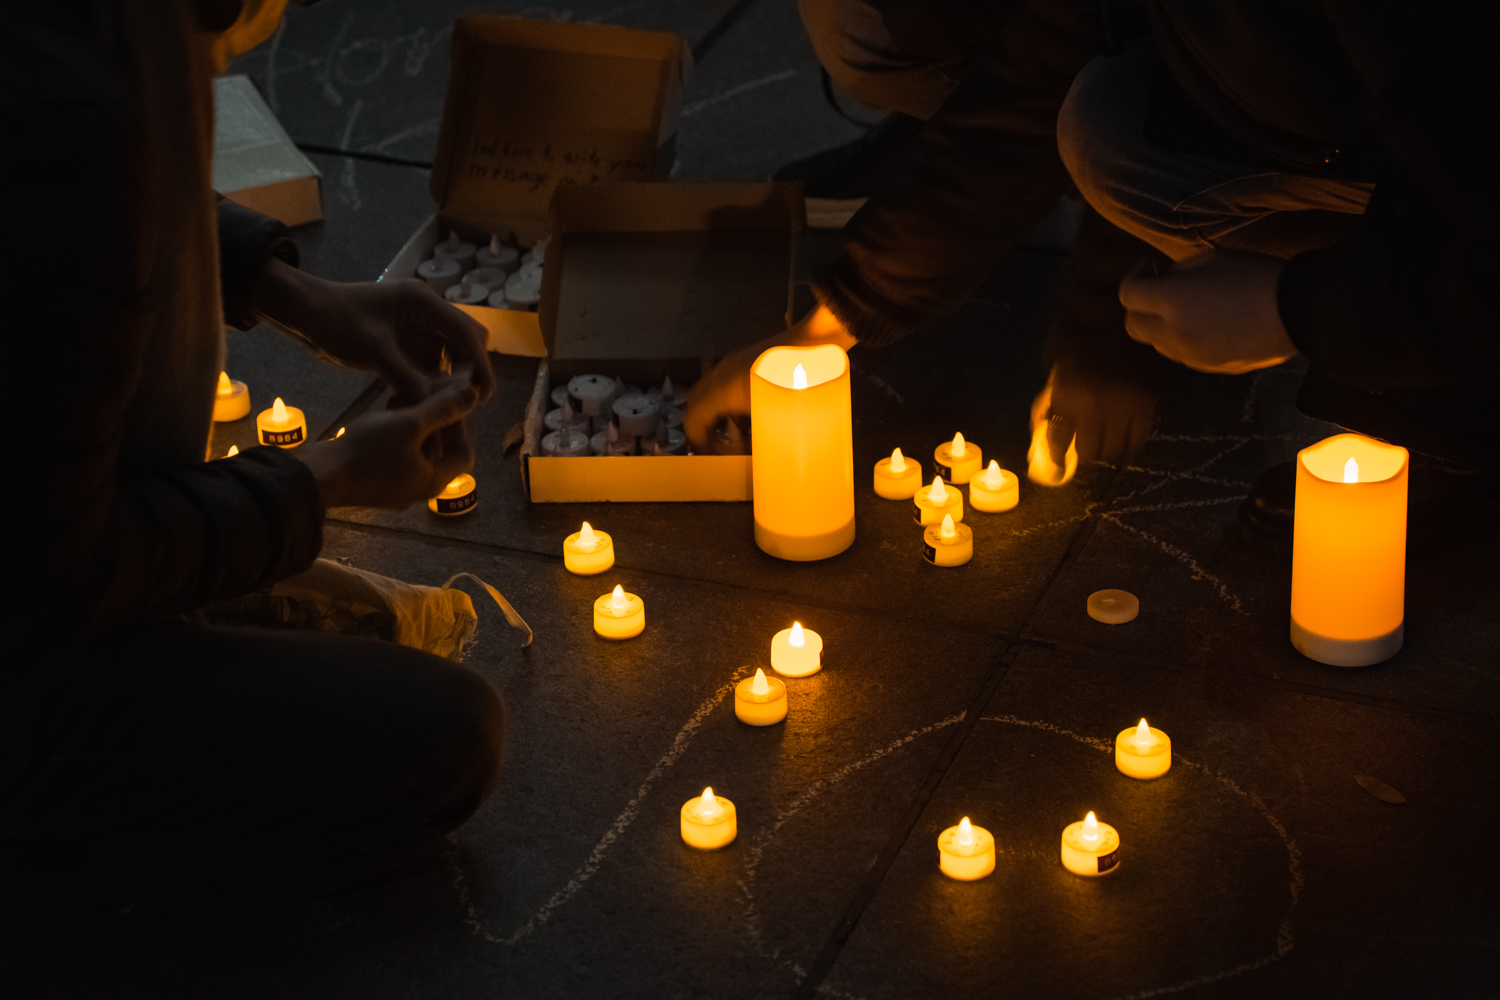 Three people squat close to the ground as they pick up small, candle-shaped lights from two boxes. In the middle are several candle-shaped lights turned-on, and two larger candle-shaped lights. There are chalk writings on the ground. Some of the candle-shaped lights have black labels on them.